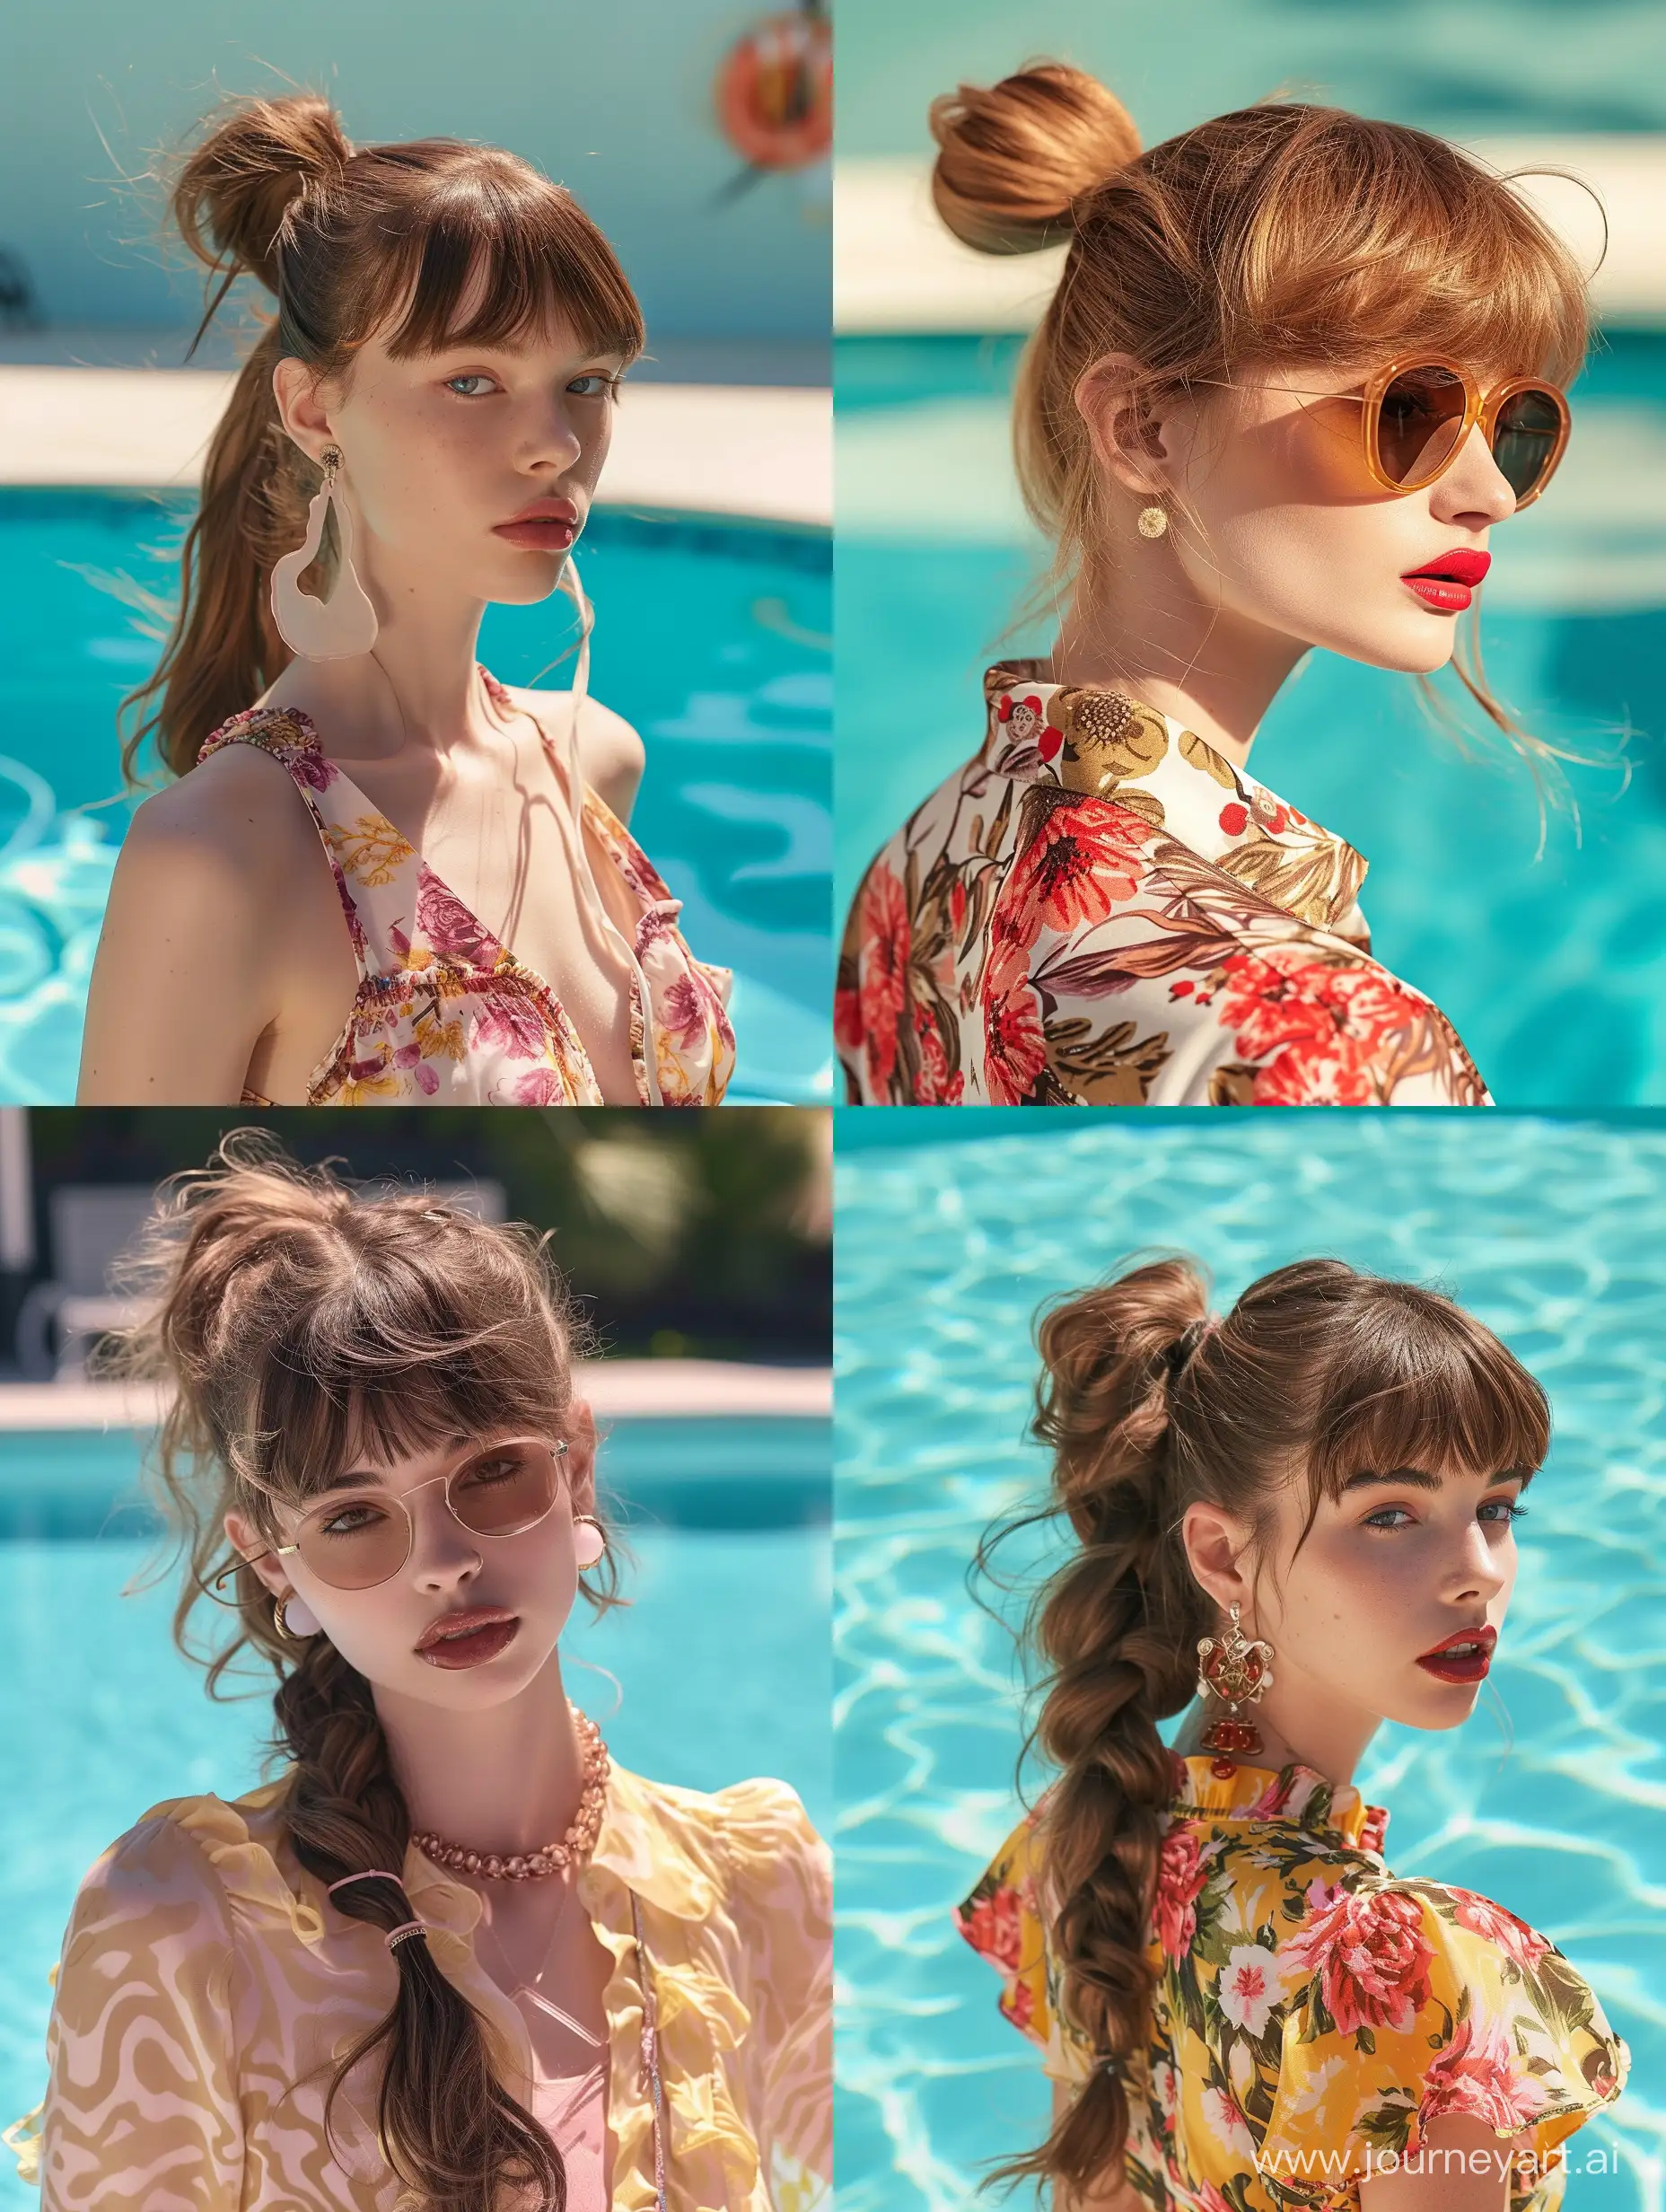 Chic-Spring-Ponytail-Hairstyles-Elegant-Lady-Showcases-Latest-Trends-by-the-Poolside